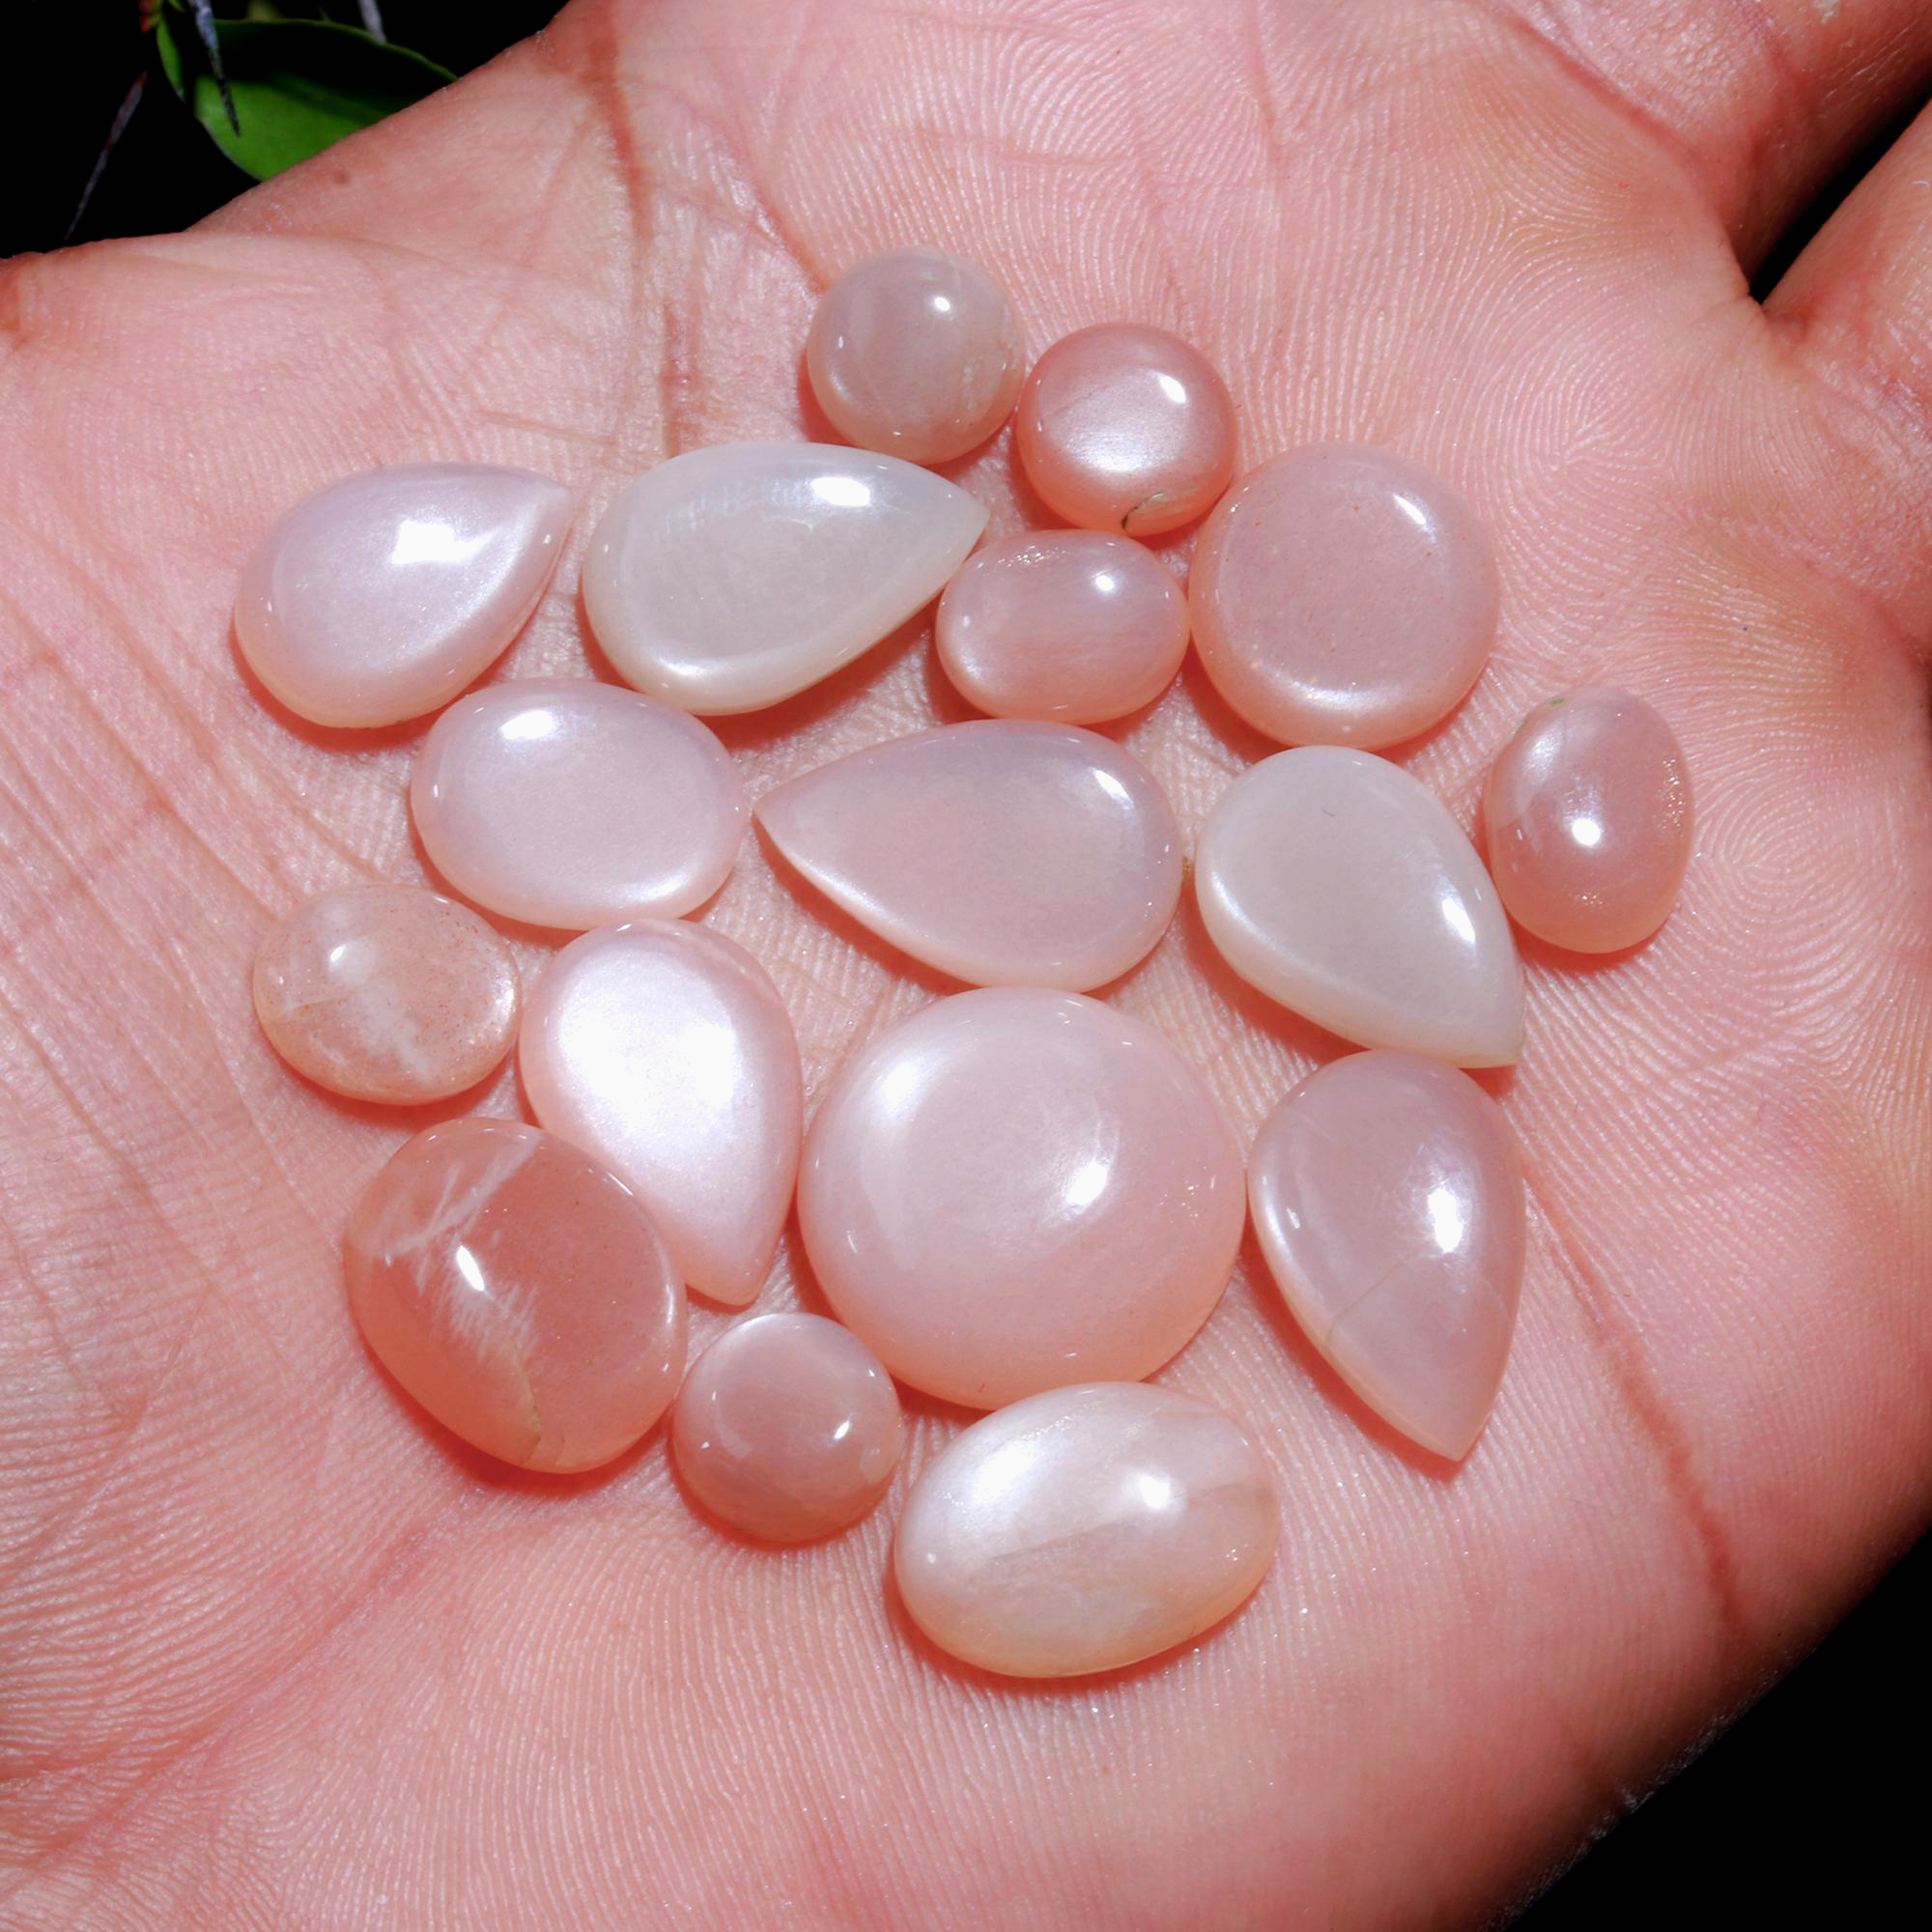 27 Pcs. 145Cts. Natural Peach Rainbow Moonstone polished Mix Cabochon Wholesale Loose Lot Size 26x26 8x8mm Gemstone for jewelry#1137